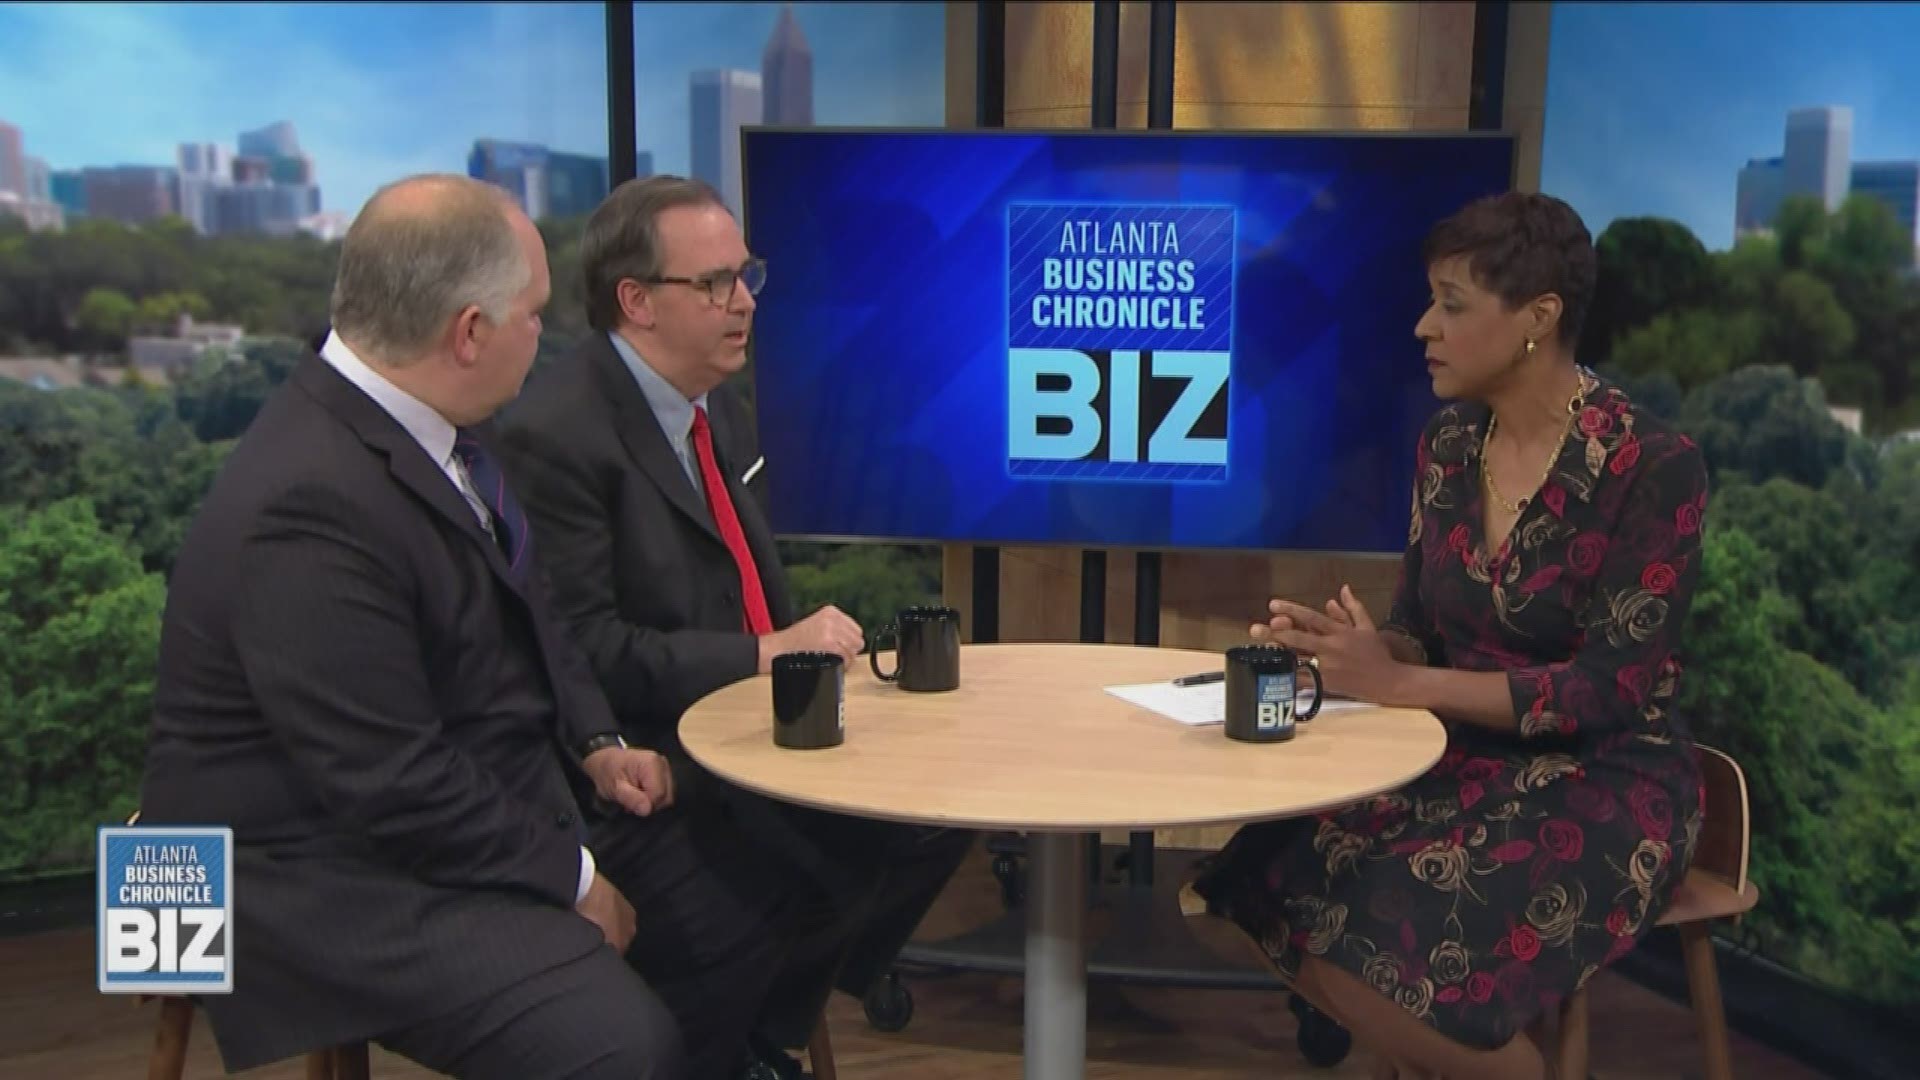 What's being done to protect our data? Crystal Edmonson's joined by the Consumer Data Industry Association and RELX on 'Atlanta Business Chronicle's BIZ'